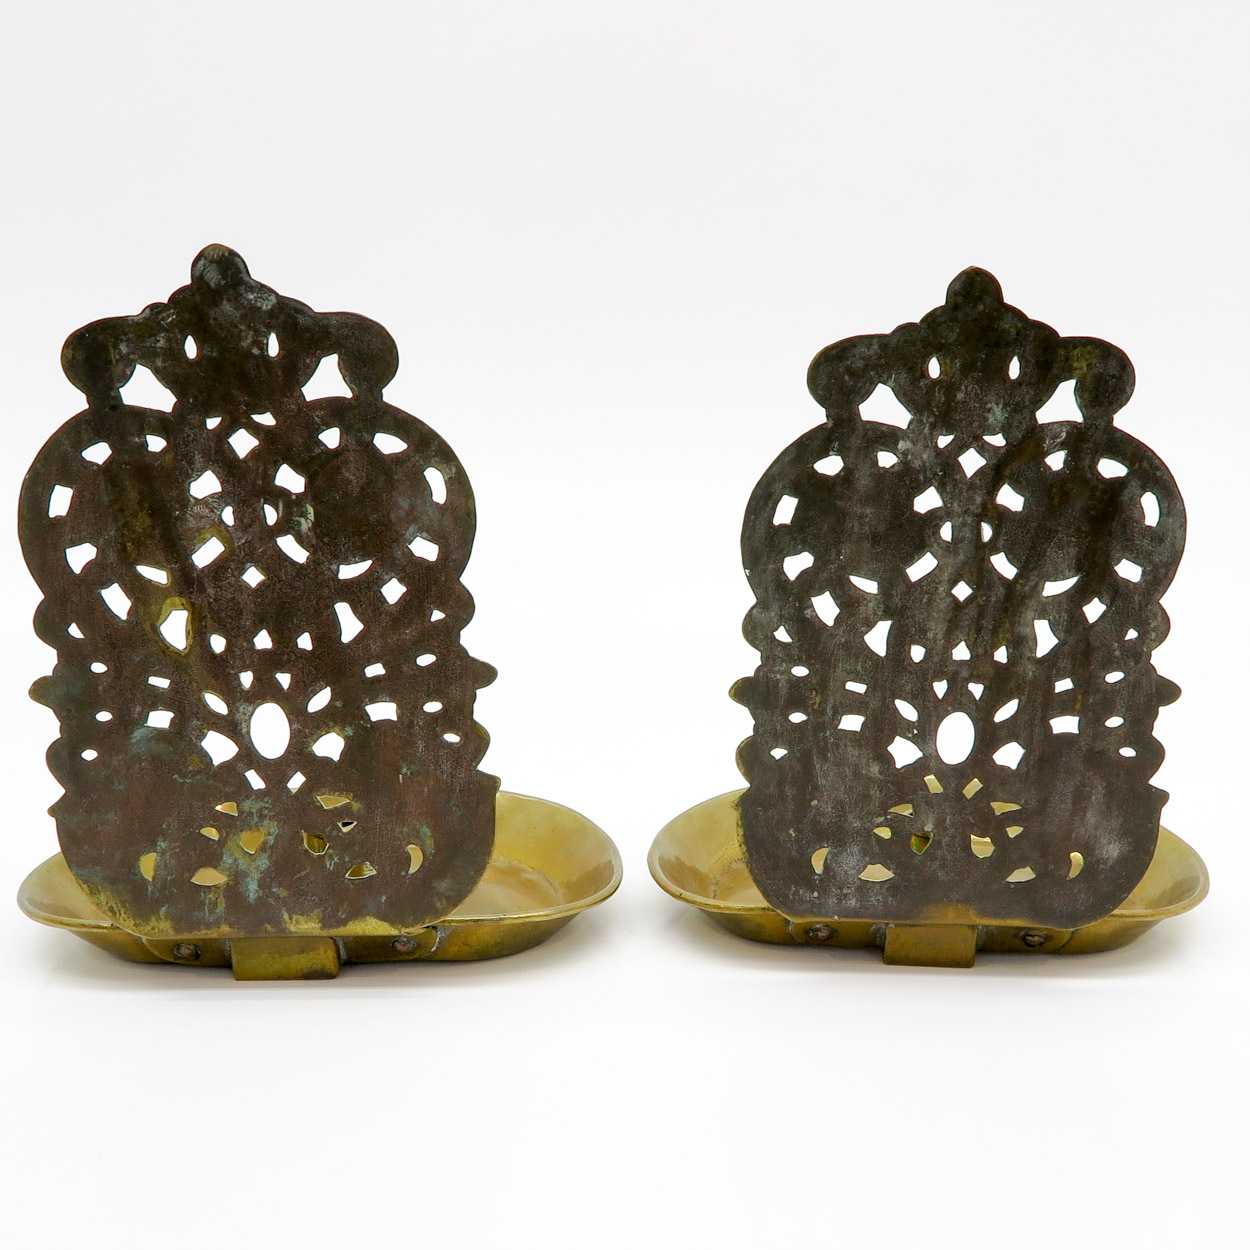 Pair of Antique Copper Wall Appliques - Image 2 of 3